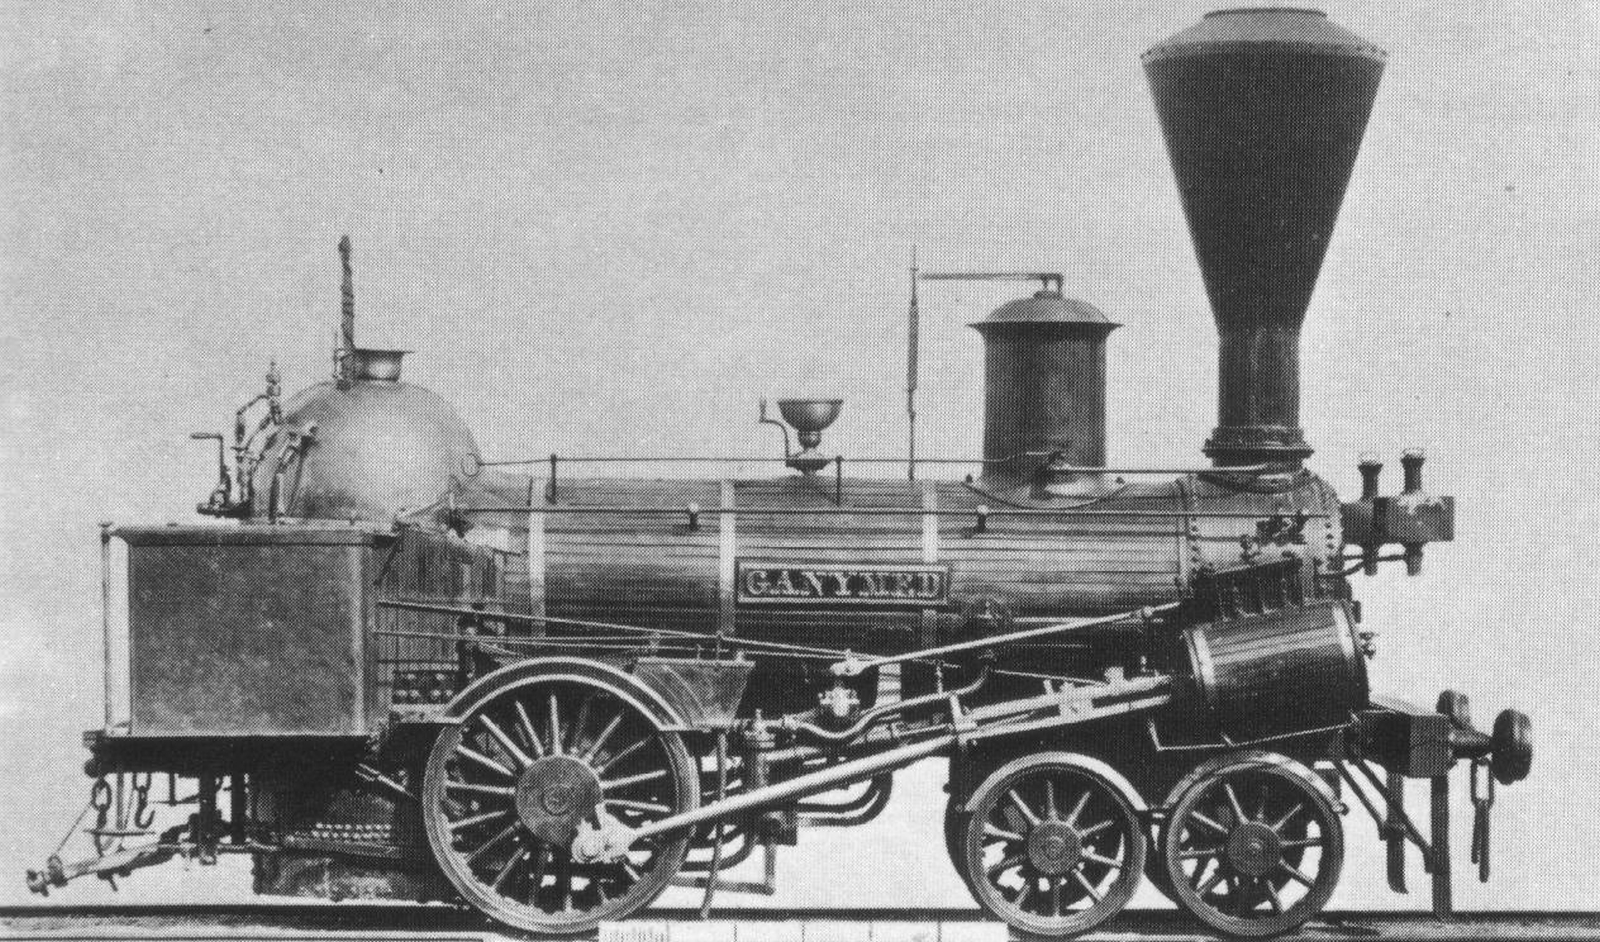 KFNB “Ganymed” with firebox overhanging to the rear